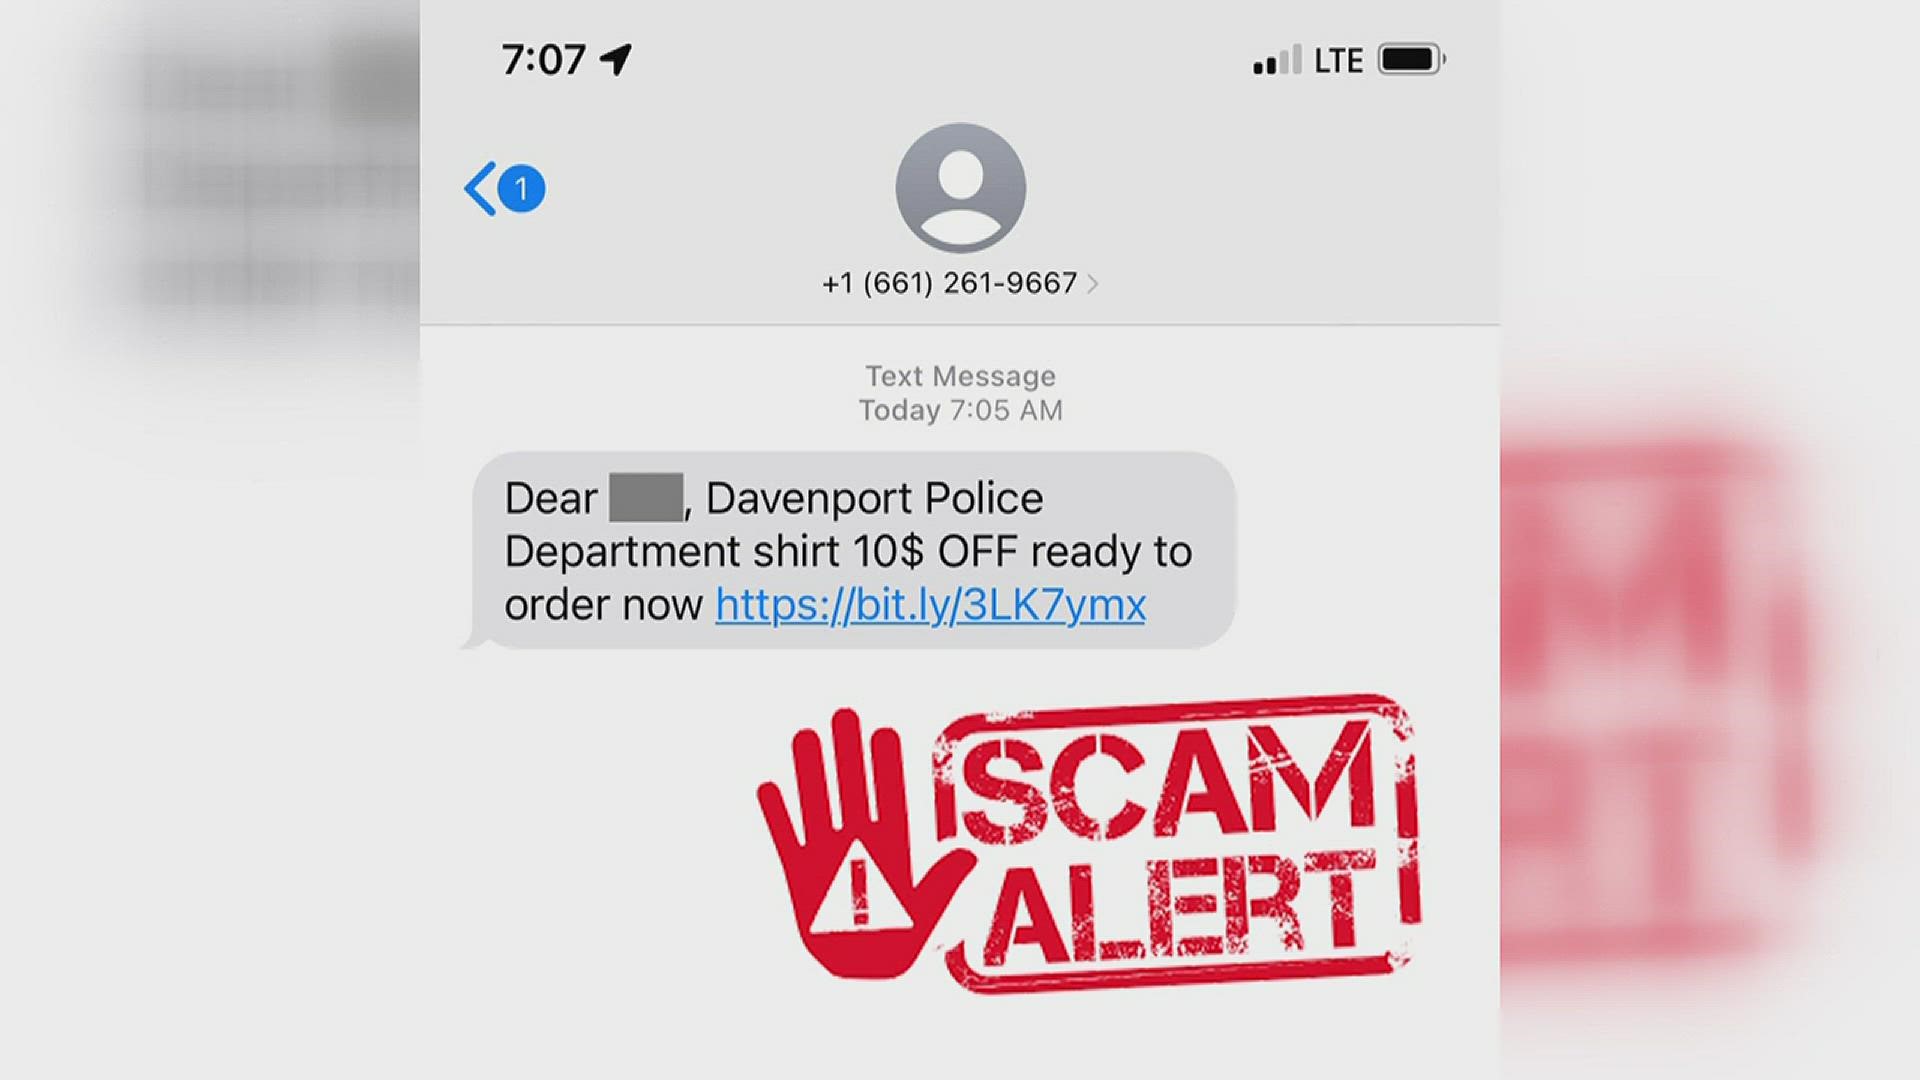 DPD says that the scam claims to sell DPD shirts for $10 off via a link in a text message.